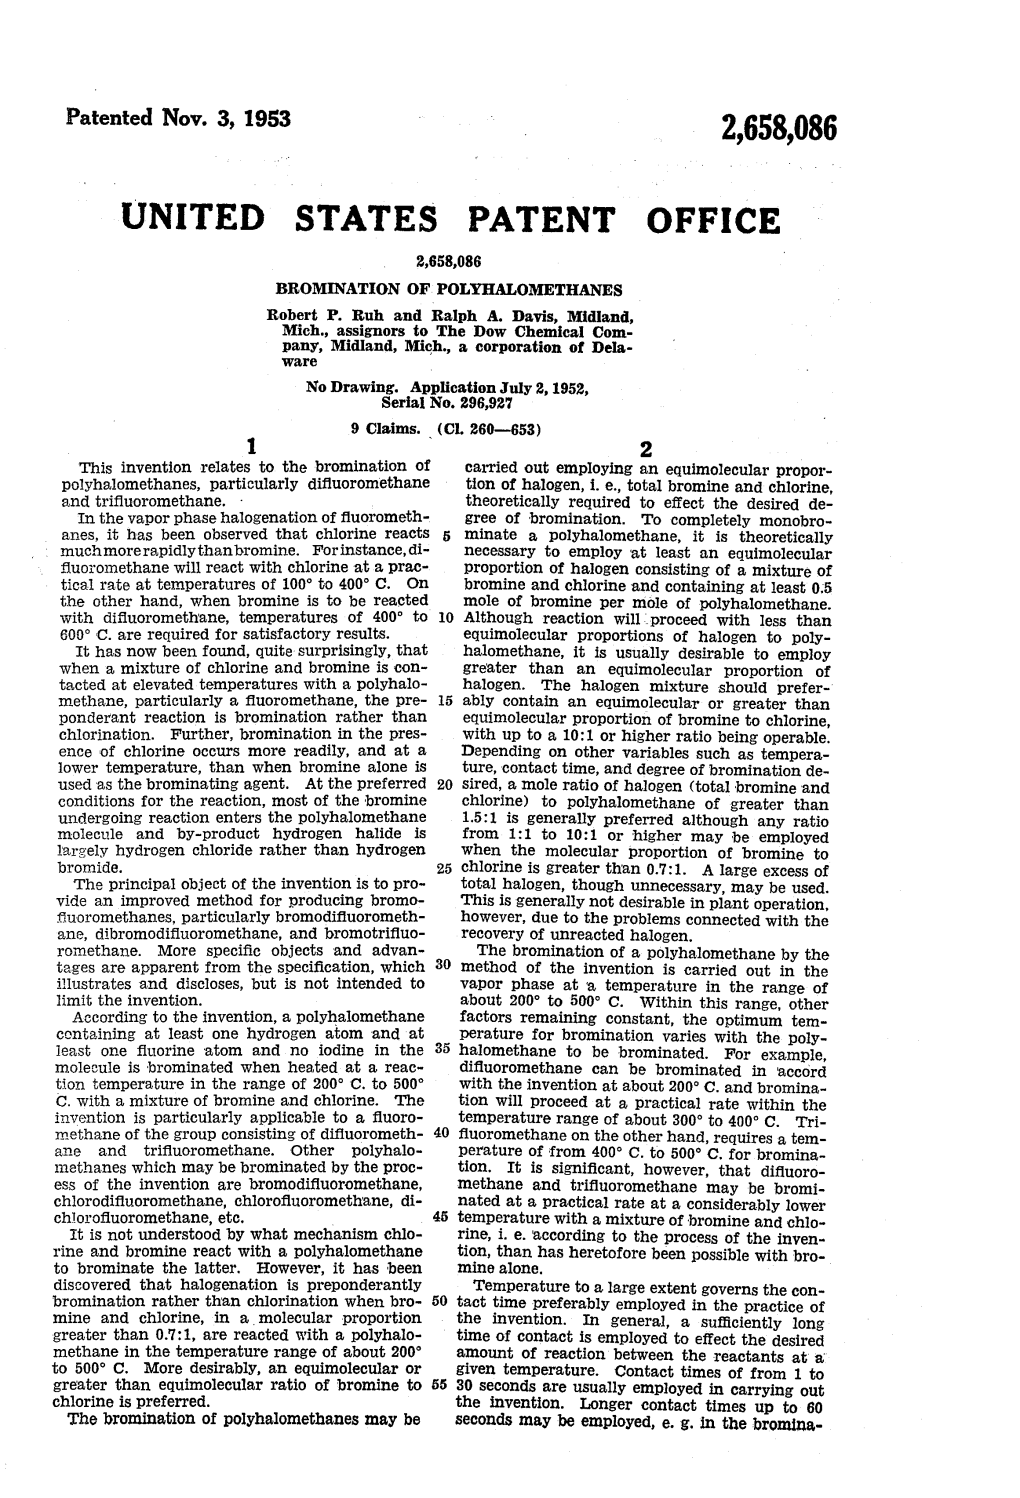 UNITED STATES PATENT OFFICE 2,658,086 BROMINATION of POLYHALOMETHANES Robert E